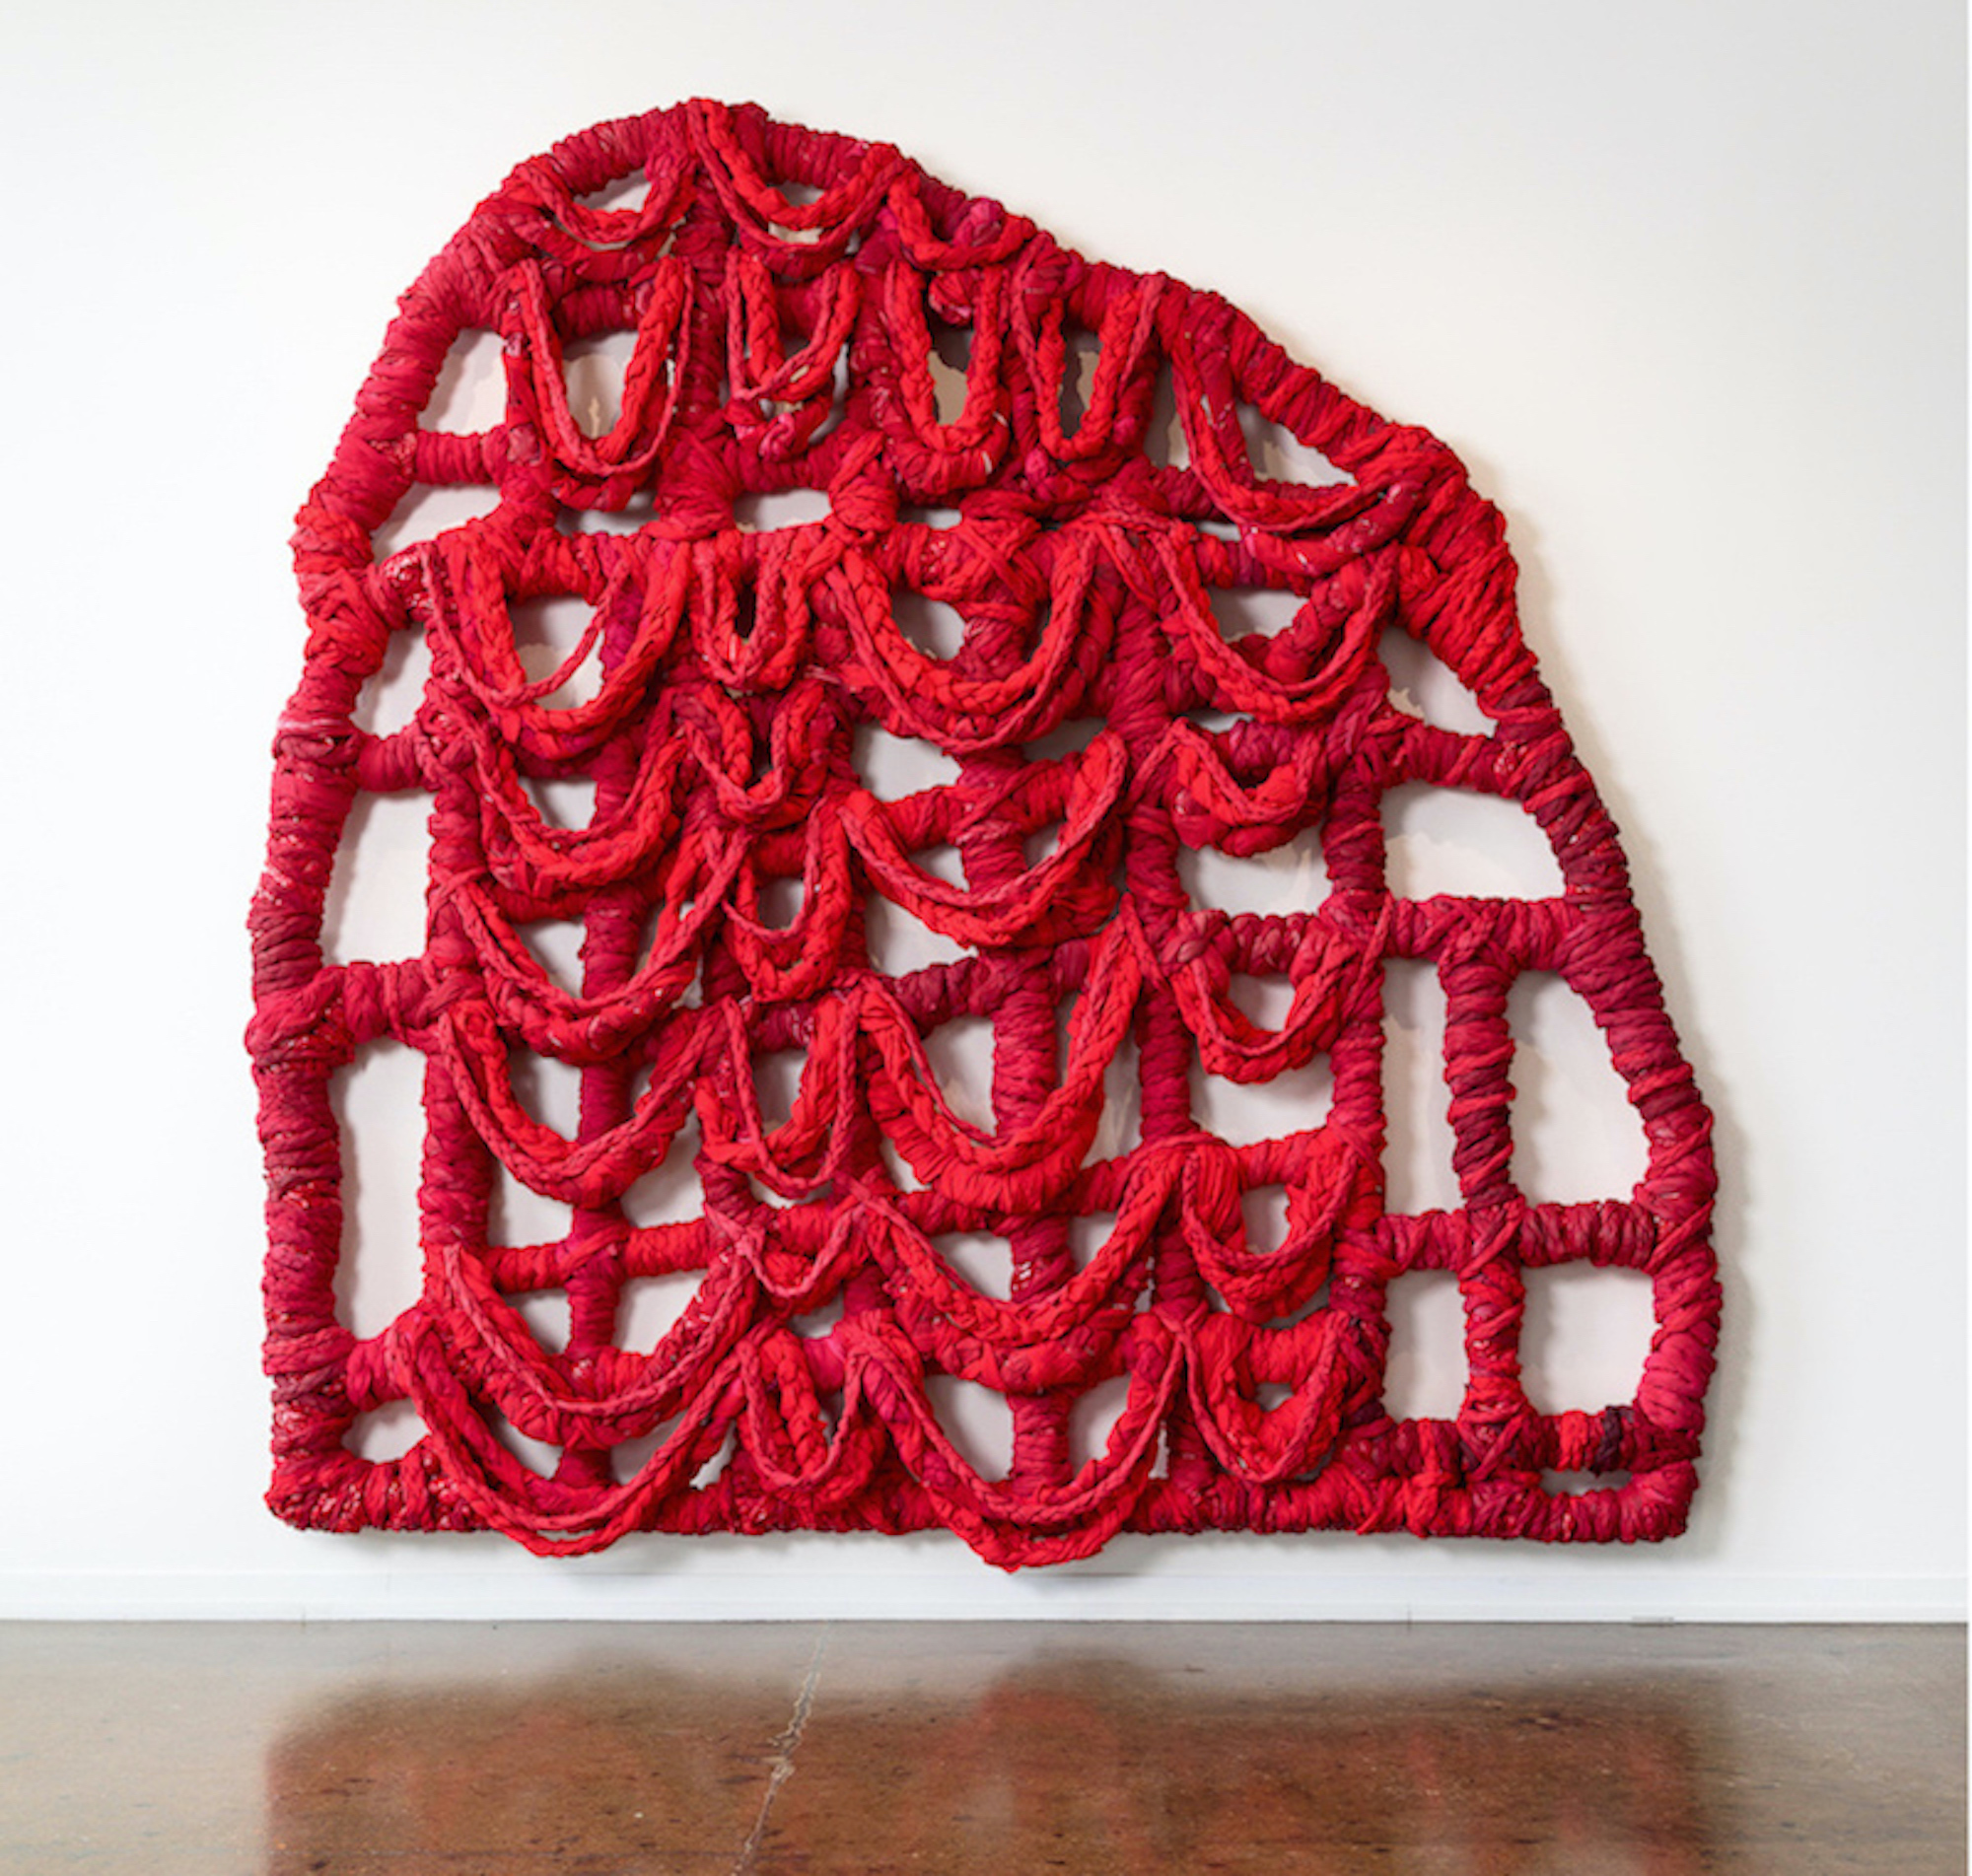 A large amorphous gate of braided sheets dyed red and draped together in the form of a grid.